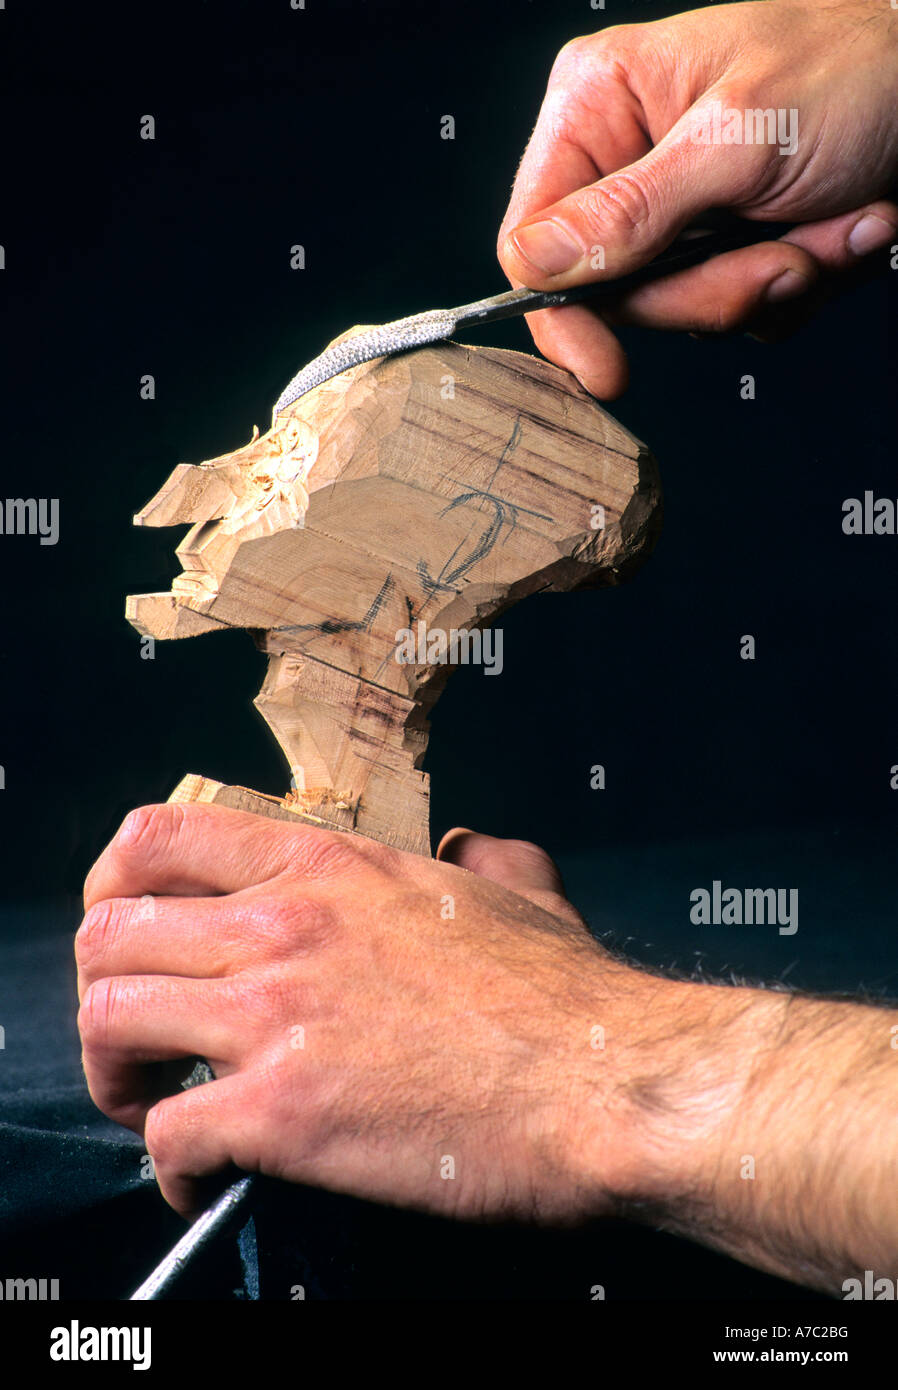 Puppet being carved from wood Stock Photo